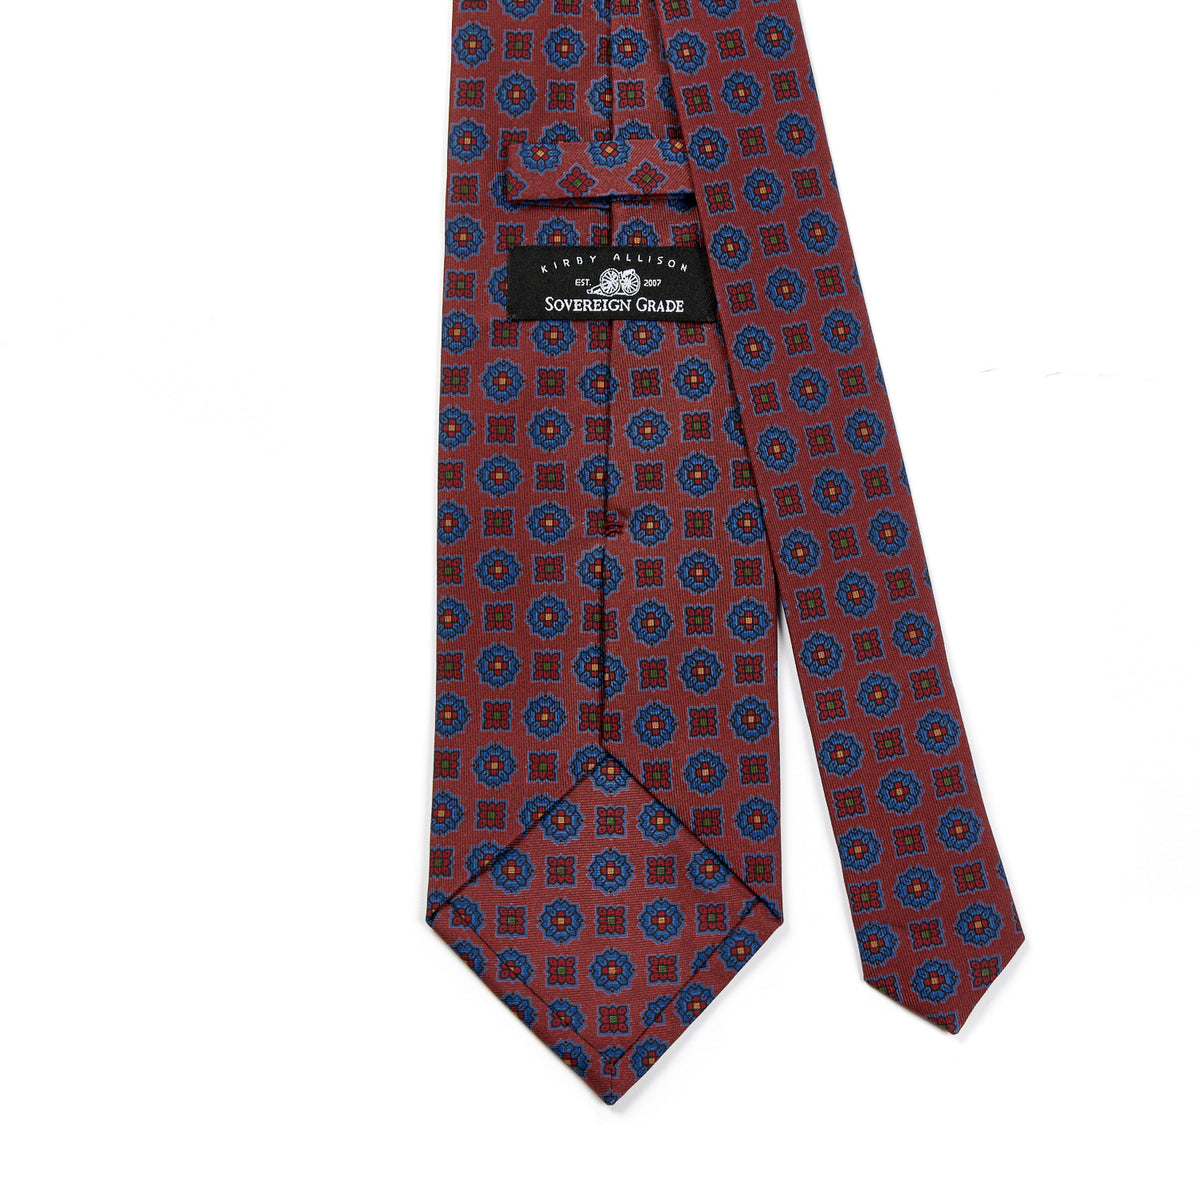 A Sovereign Grade Rust Floral Diamond Ancient Madder Tie, 150x8.5 cm by KirbyAllison.com with a red and blue pattern.